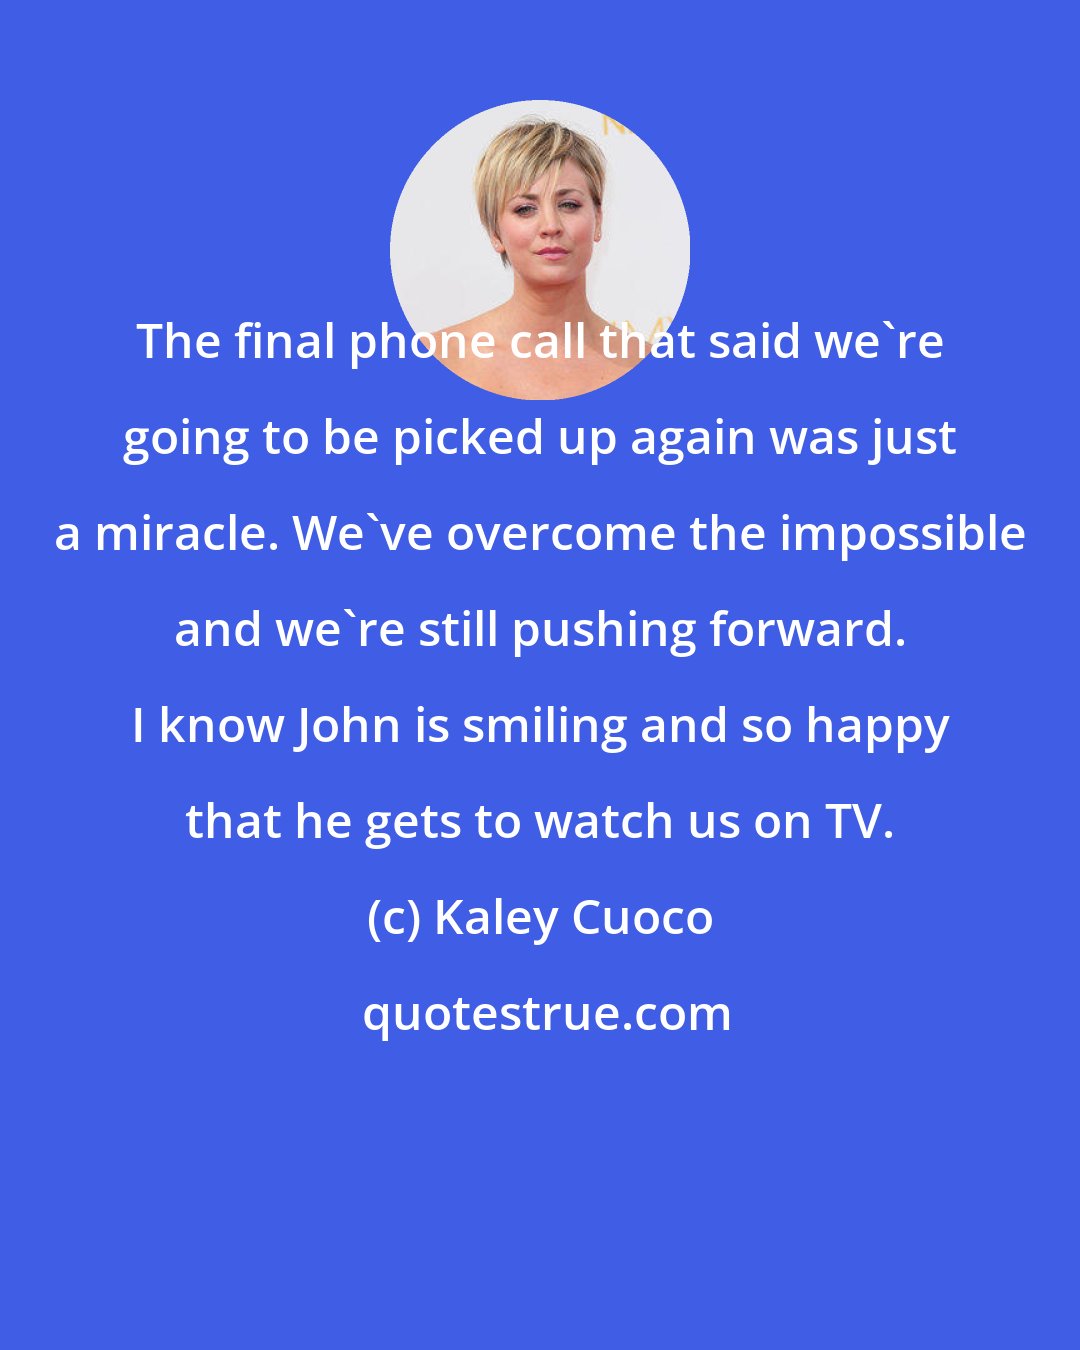 Kaley Cuoco: The final phone call that said we're going to be picked up again was just a miracle. We've overcome the impossible and we're still pushing forward. I know John is smiling and so happy that he gets to watch us on TV.